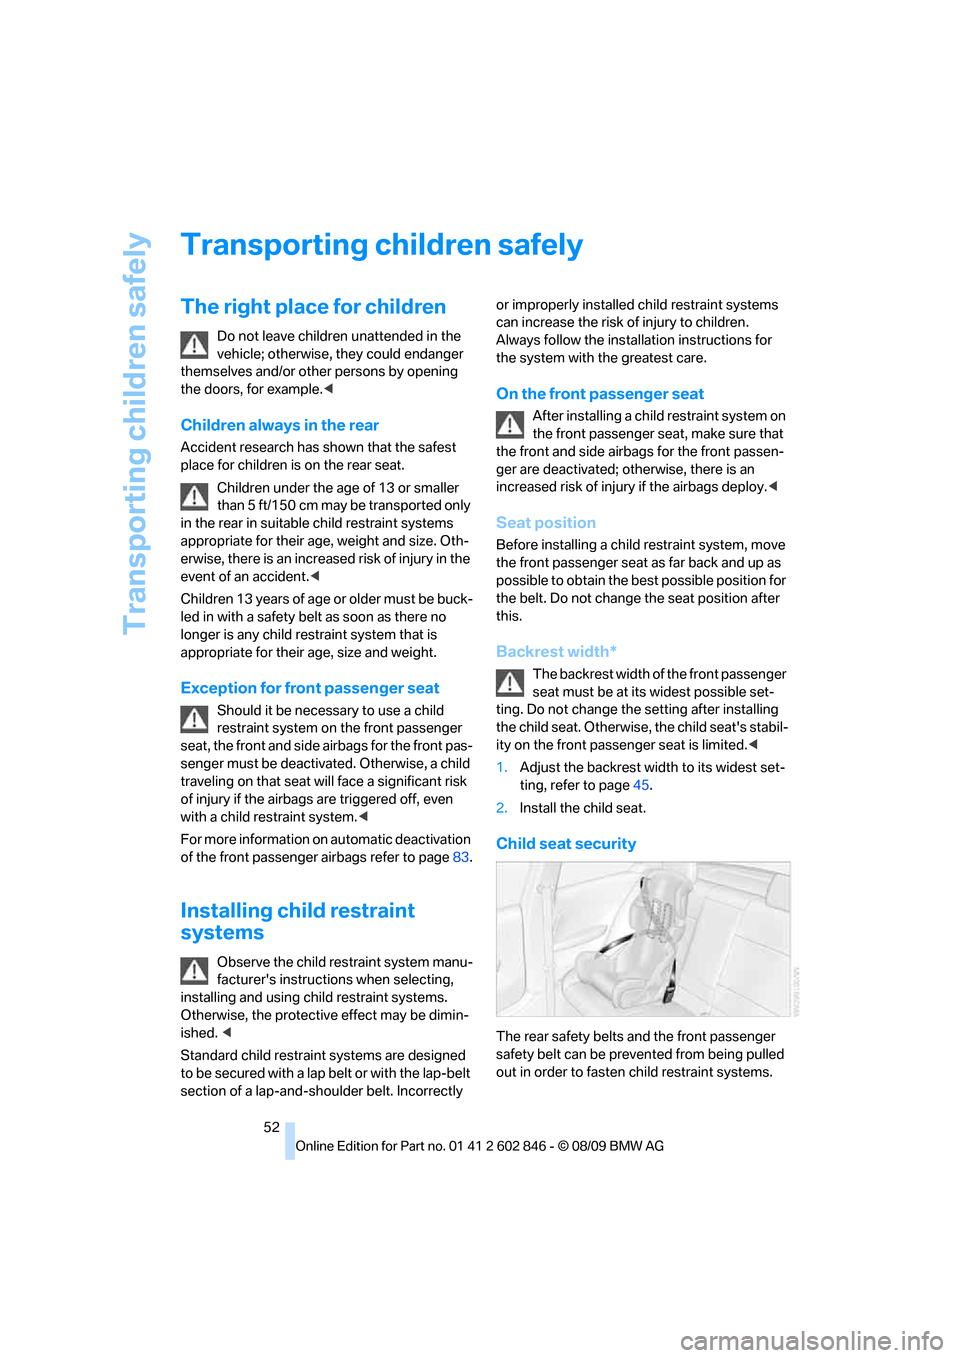 BMW 128I 2010 E81 Owners Manual Transporting children safely
52
Transporting children safely
The right place for children
Do not leave children unattended in the 
vehicle; otherwise, they could endanger 
themselves and/or other pers